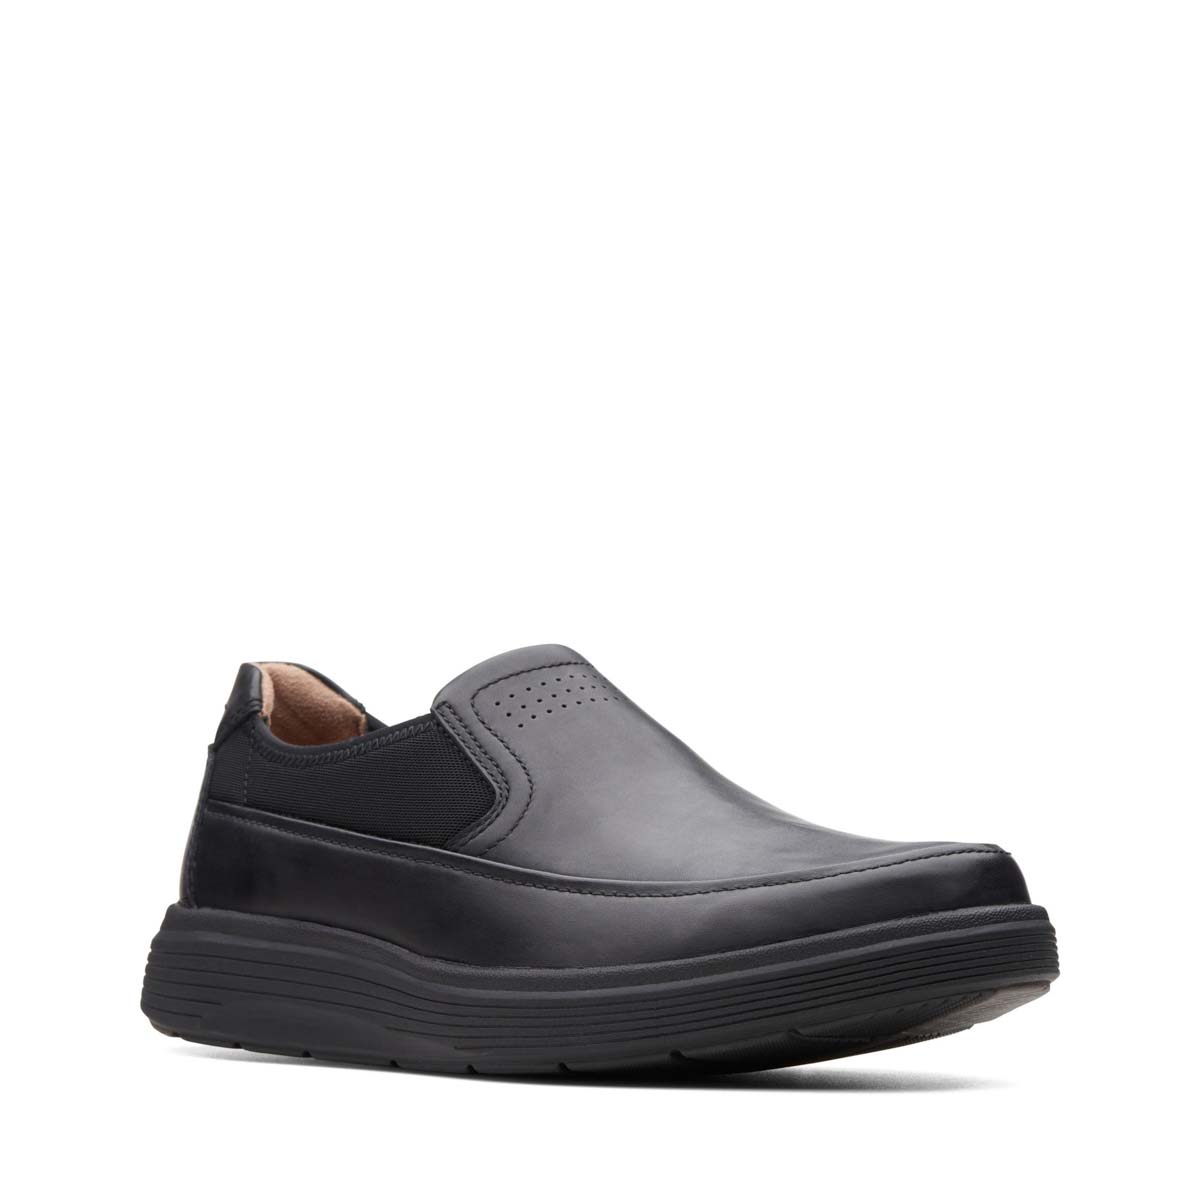 Clarks Un Abode Go Black Leather Mens Slip-On Shoes 370767G In Size 10 In Plain Black Leather G Width Fitting